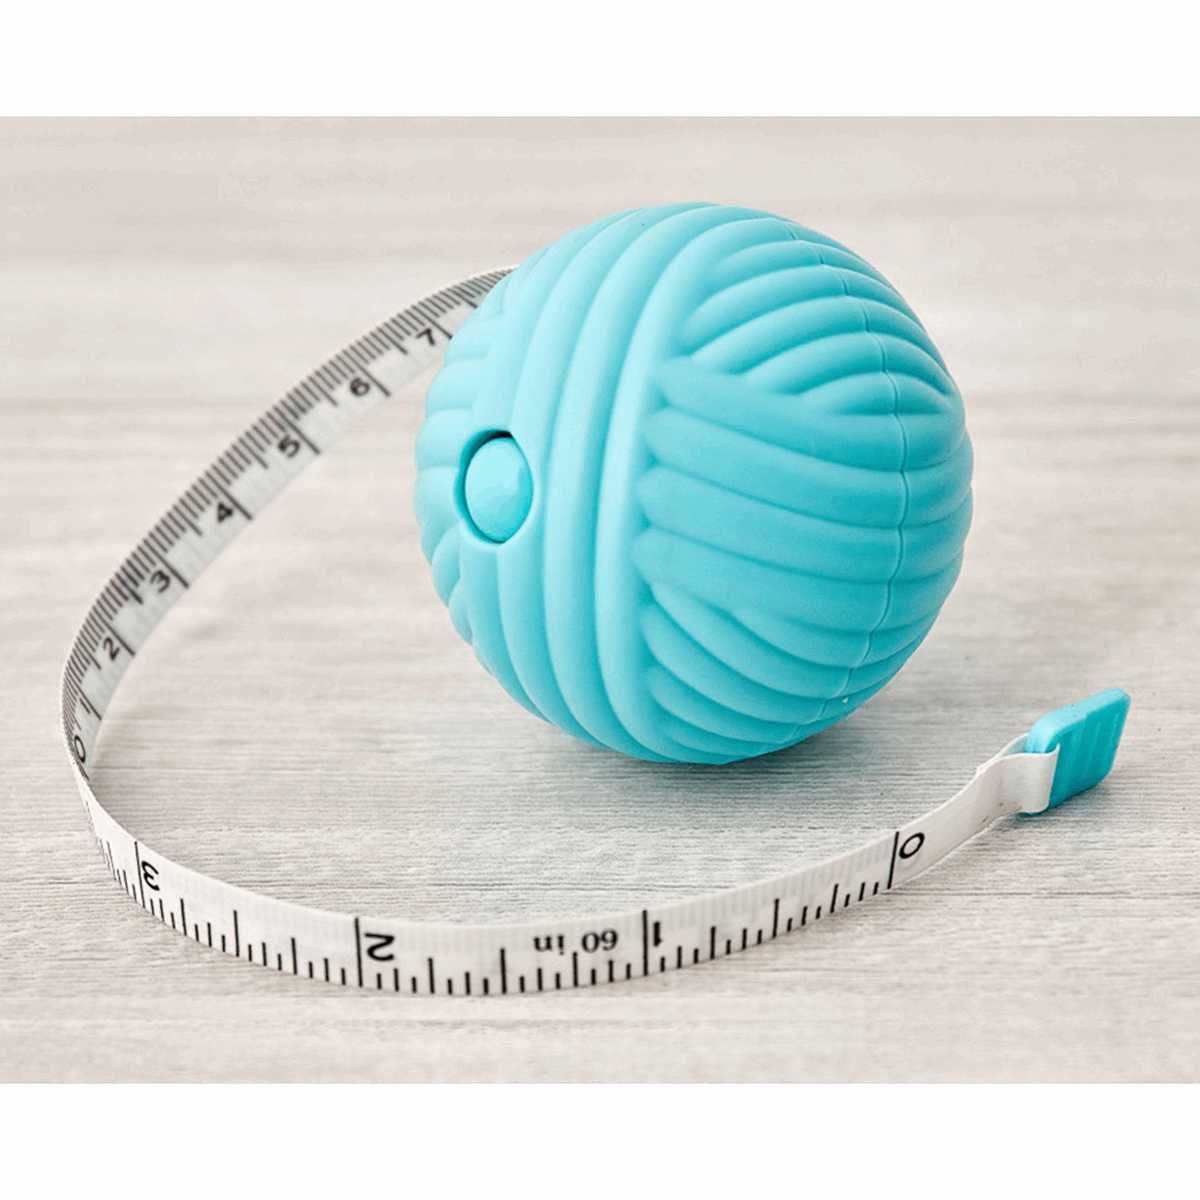 Knitting accessories: make a tape measure cover - Gathered